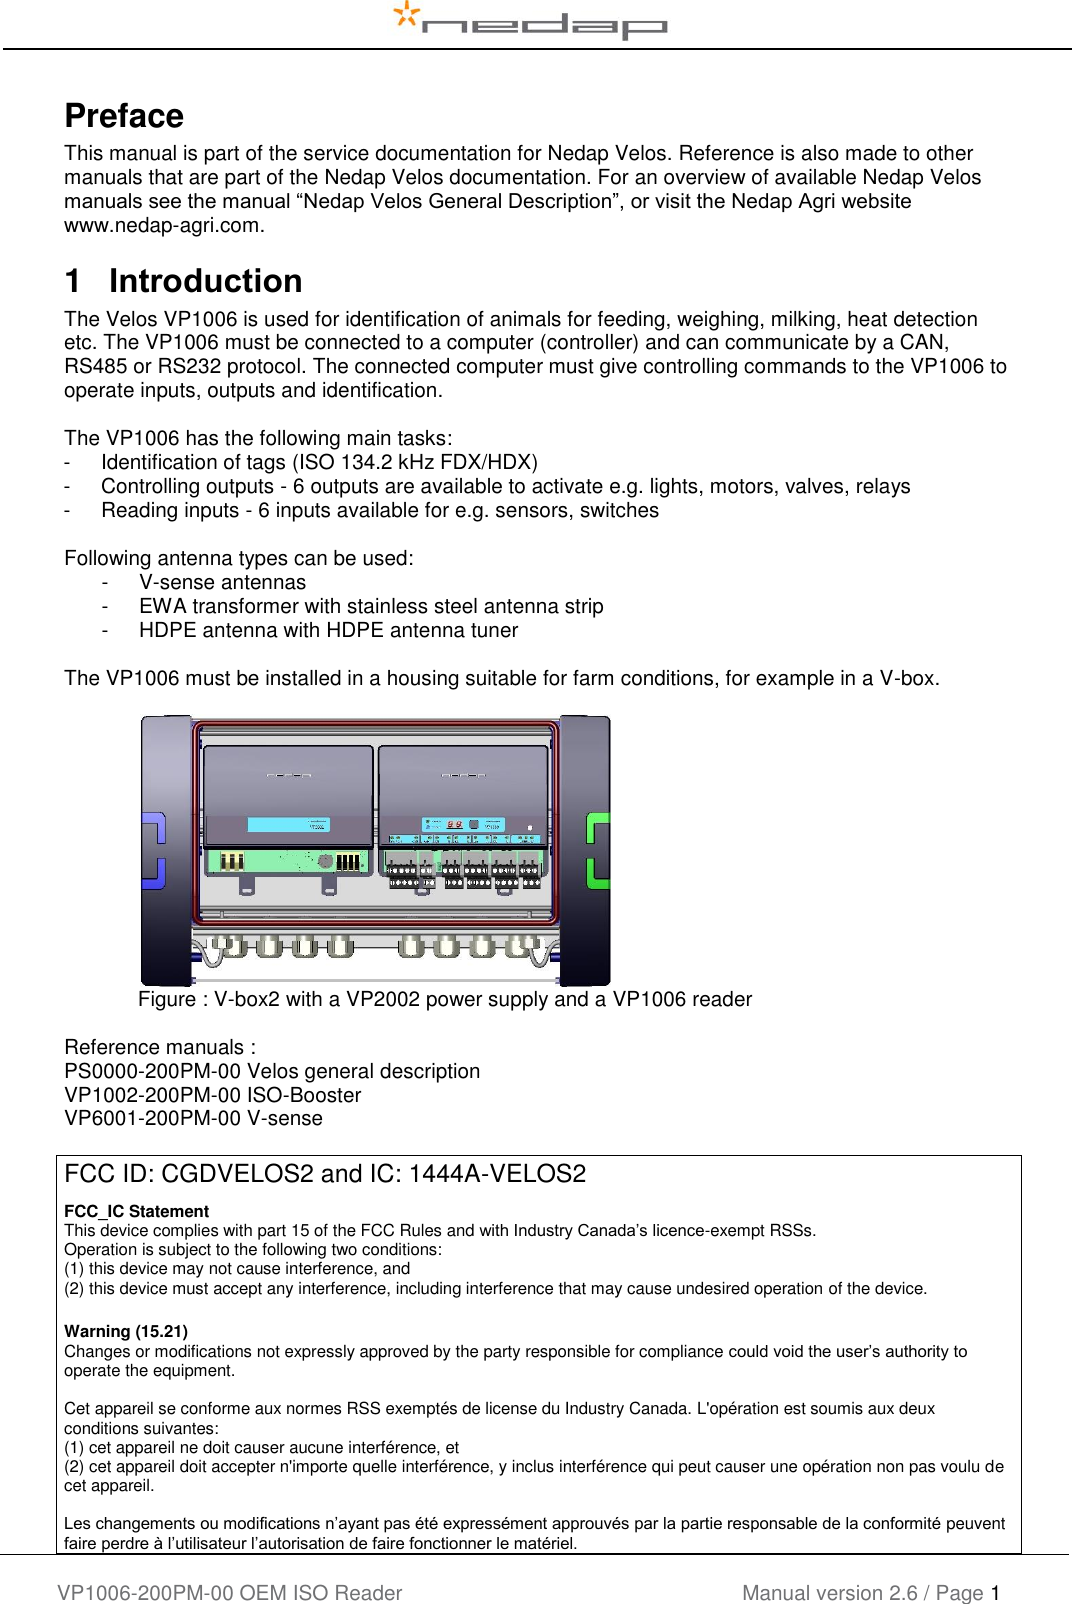    VP1006-200PM-00 OEM ISO Reader Manual version 2.6 / Page 1    Preface This manual is part of the service documentation for Nedap Velos. Reference is also made to other manuals that are part of the Nedap Velos documentation. For an overview of available Nedap Velos manuals see the manual “Nedap Velos General Description”, or visit the Nedap Agri website www.nedap-agri.com.   1  Introduction The Velos VP1006 is used for identification of animals for feeding, weighing, milking, heat detection etc. The VP1006 must be connected to a computer (controller) and can communicate by a CAN, RS485 or RS232 protocol. The connected computer must give controlling commands to the VP1006 to operate inputs, outputs and identification.   The VP1006 has the following main tasks: -  Identification of tags (ISO 134.2 kHz FDX/HDX) -  Controlling outputs - 6 outputs are available to activate e.g. lights, motors, valves, relays -  Reading inputs - 6 inputs available for e.g. sensors, switches  Following antenna types can be used: -  V-sense antennas -  EWA transformer with stainless steel antenna strip -  HDPE antenna with HDPE antenna tuner  The VP1006 must be installed in a housing suitable for farm conditions, for example in a V-box.      Figure : V-box2 with a VP2002 power supply and a VP1006 reader  Reference manuals : PS0000-200PM-00 Velos general description VP1002-200PM-00 ISO-Booster VP6001-200PM-00 V-sense  FCC ID: CGDVELOS2 and IC: 1444A-VELOS2  FCC_IC Statement This device complies with part 15 of the FCC Rules and with Industry Canada’s licence-exempt RSSs. Operation is subject to the following two conditions: (1) this device may not cause interference, and (2) this device must accept any interference, including interference that may cause undesired operation of the device. Warning (15.21)  Changes or modifications not expressly approved by the party responsible for compliance could void the user’s authority to operate the equipment.  Cet appareil se conforme aux normes RSS exemptés de license du Industry Canada. L&apos;opération est soumis aux deux conditions suivantes: (1) cet appareil ne doit causer aucune interférence, et  (2) cet appareil doit accepter n&apos;importe quelle interférence, y inclus interférence qui peut causer une opération non pas voulu de cet appareil.  Les changements ou modifications n’ayant pas été expressément approuvés par la partie responsable de la conformité peuvent faire perdre à l’utilisateur l’autorisation de faire fonctionner le matériel.  